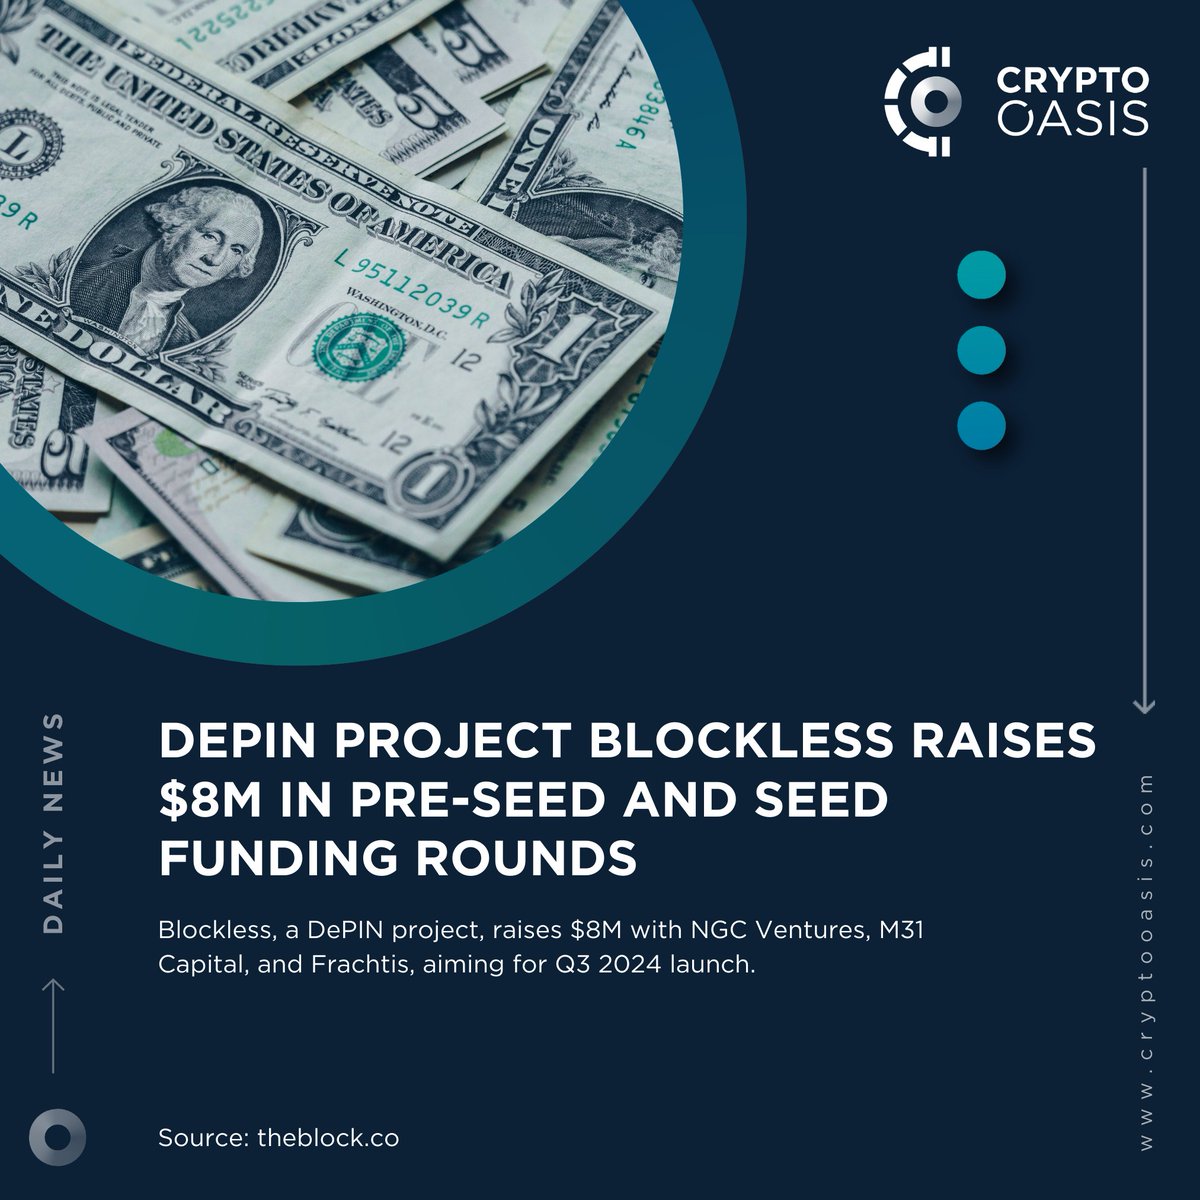 📢 Crypto Oasis Daily News Blockless, a #DePIN project, secures $8M in pre-seed and seed funding rounds. @NGC_Ventures leads the pre-seed round with $3 million, while @M31Capital and @frachtisvc co-lead the seed round with $5M. tinyurl.com/y9jrju4x @TheBlock__